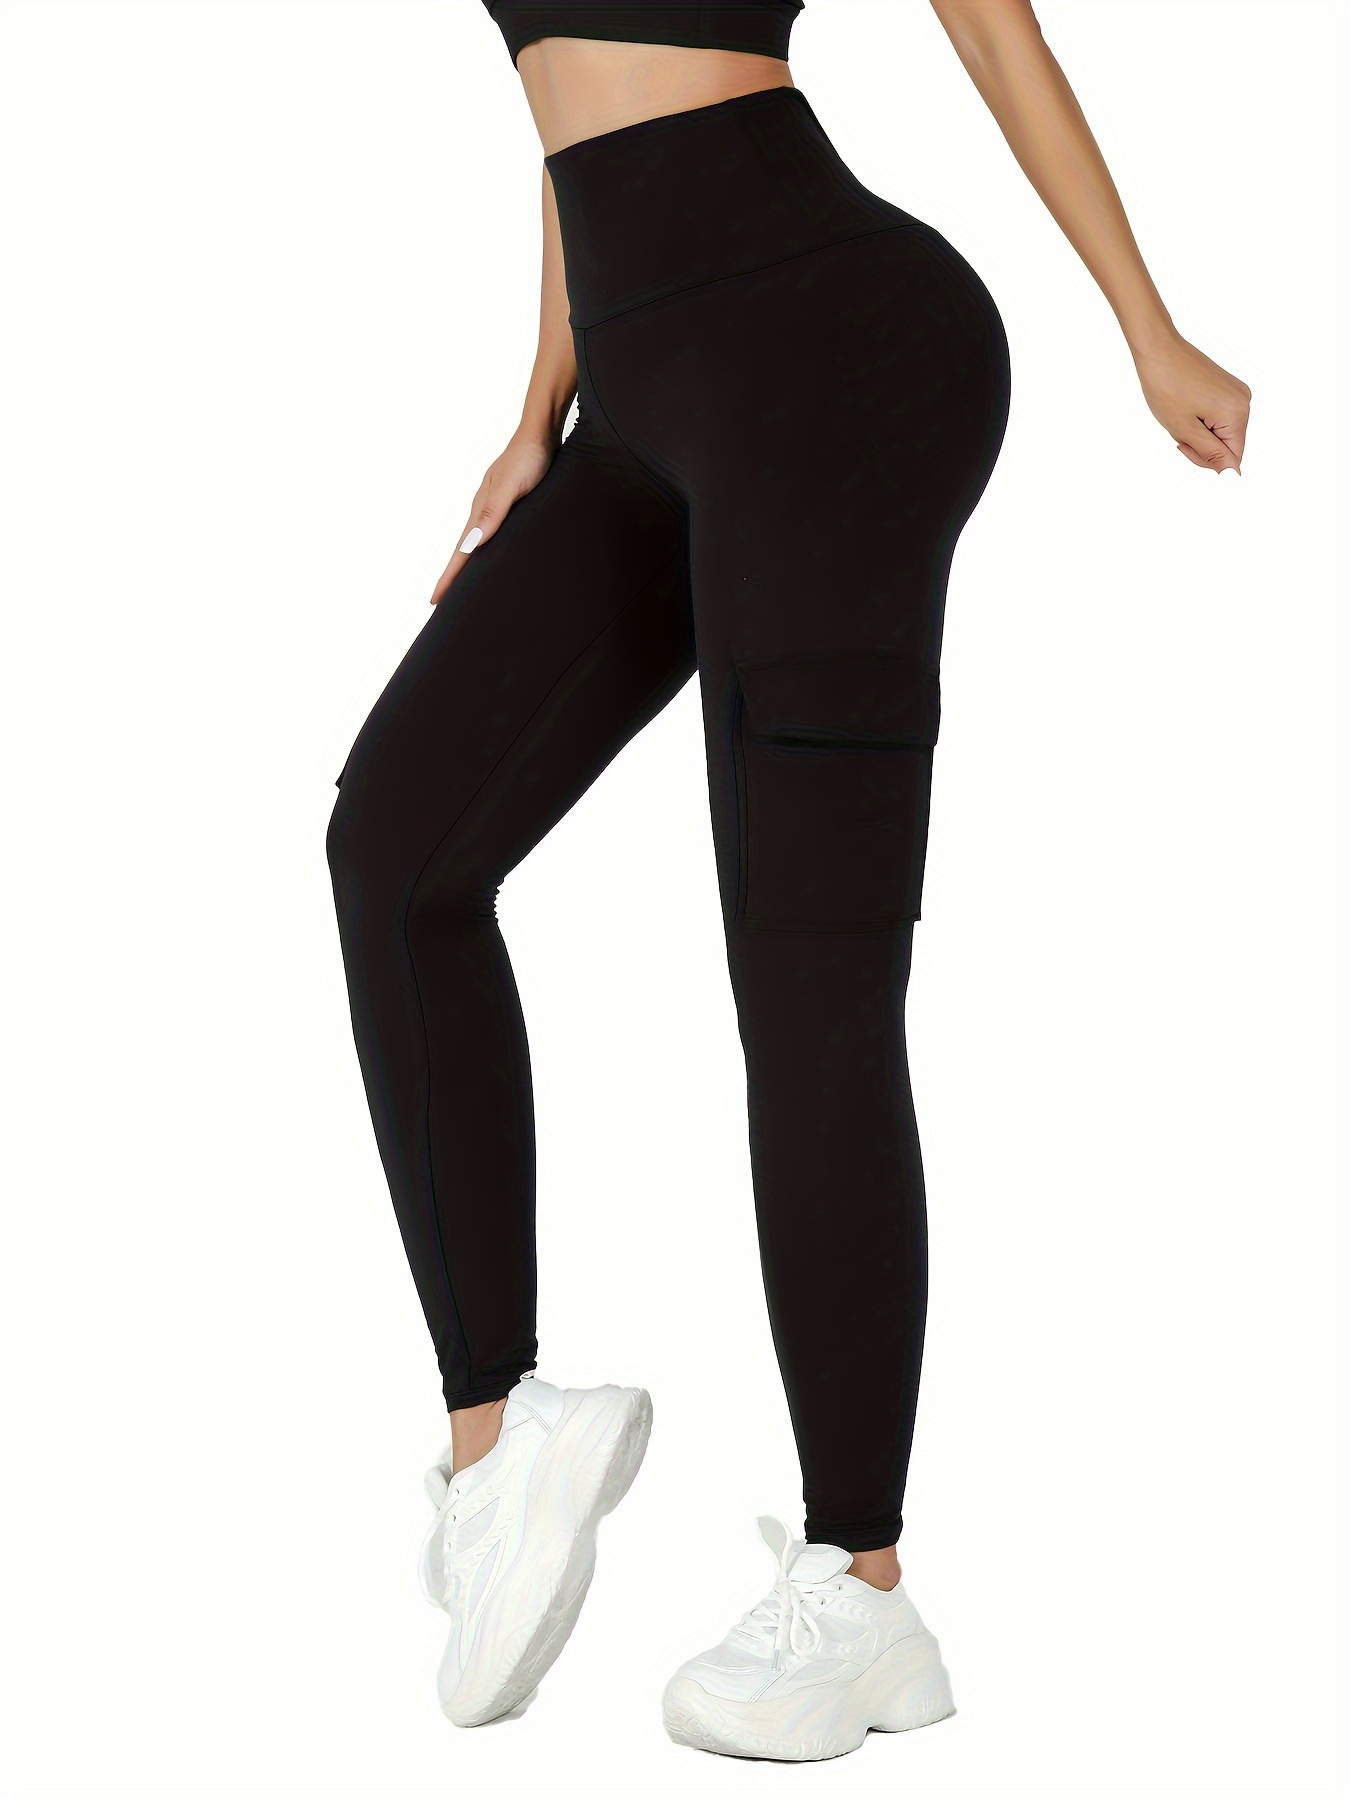 90 Degree By Reflex High Waist Fleece Lined Leggings with Side Pocket -  Yoga Pants - Black with Pocket 2 Pack - Small